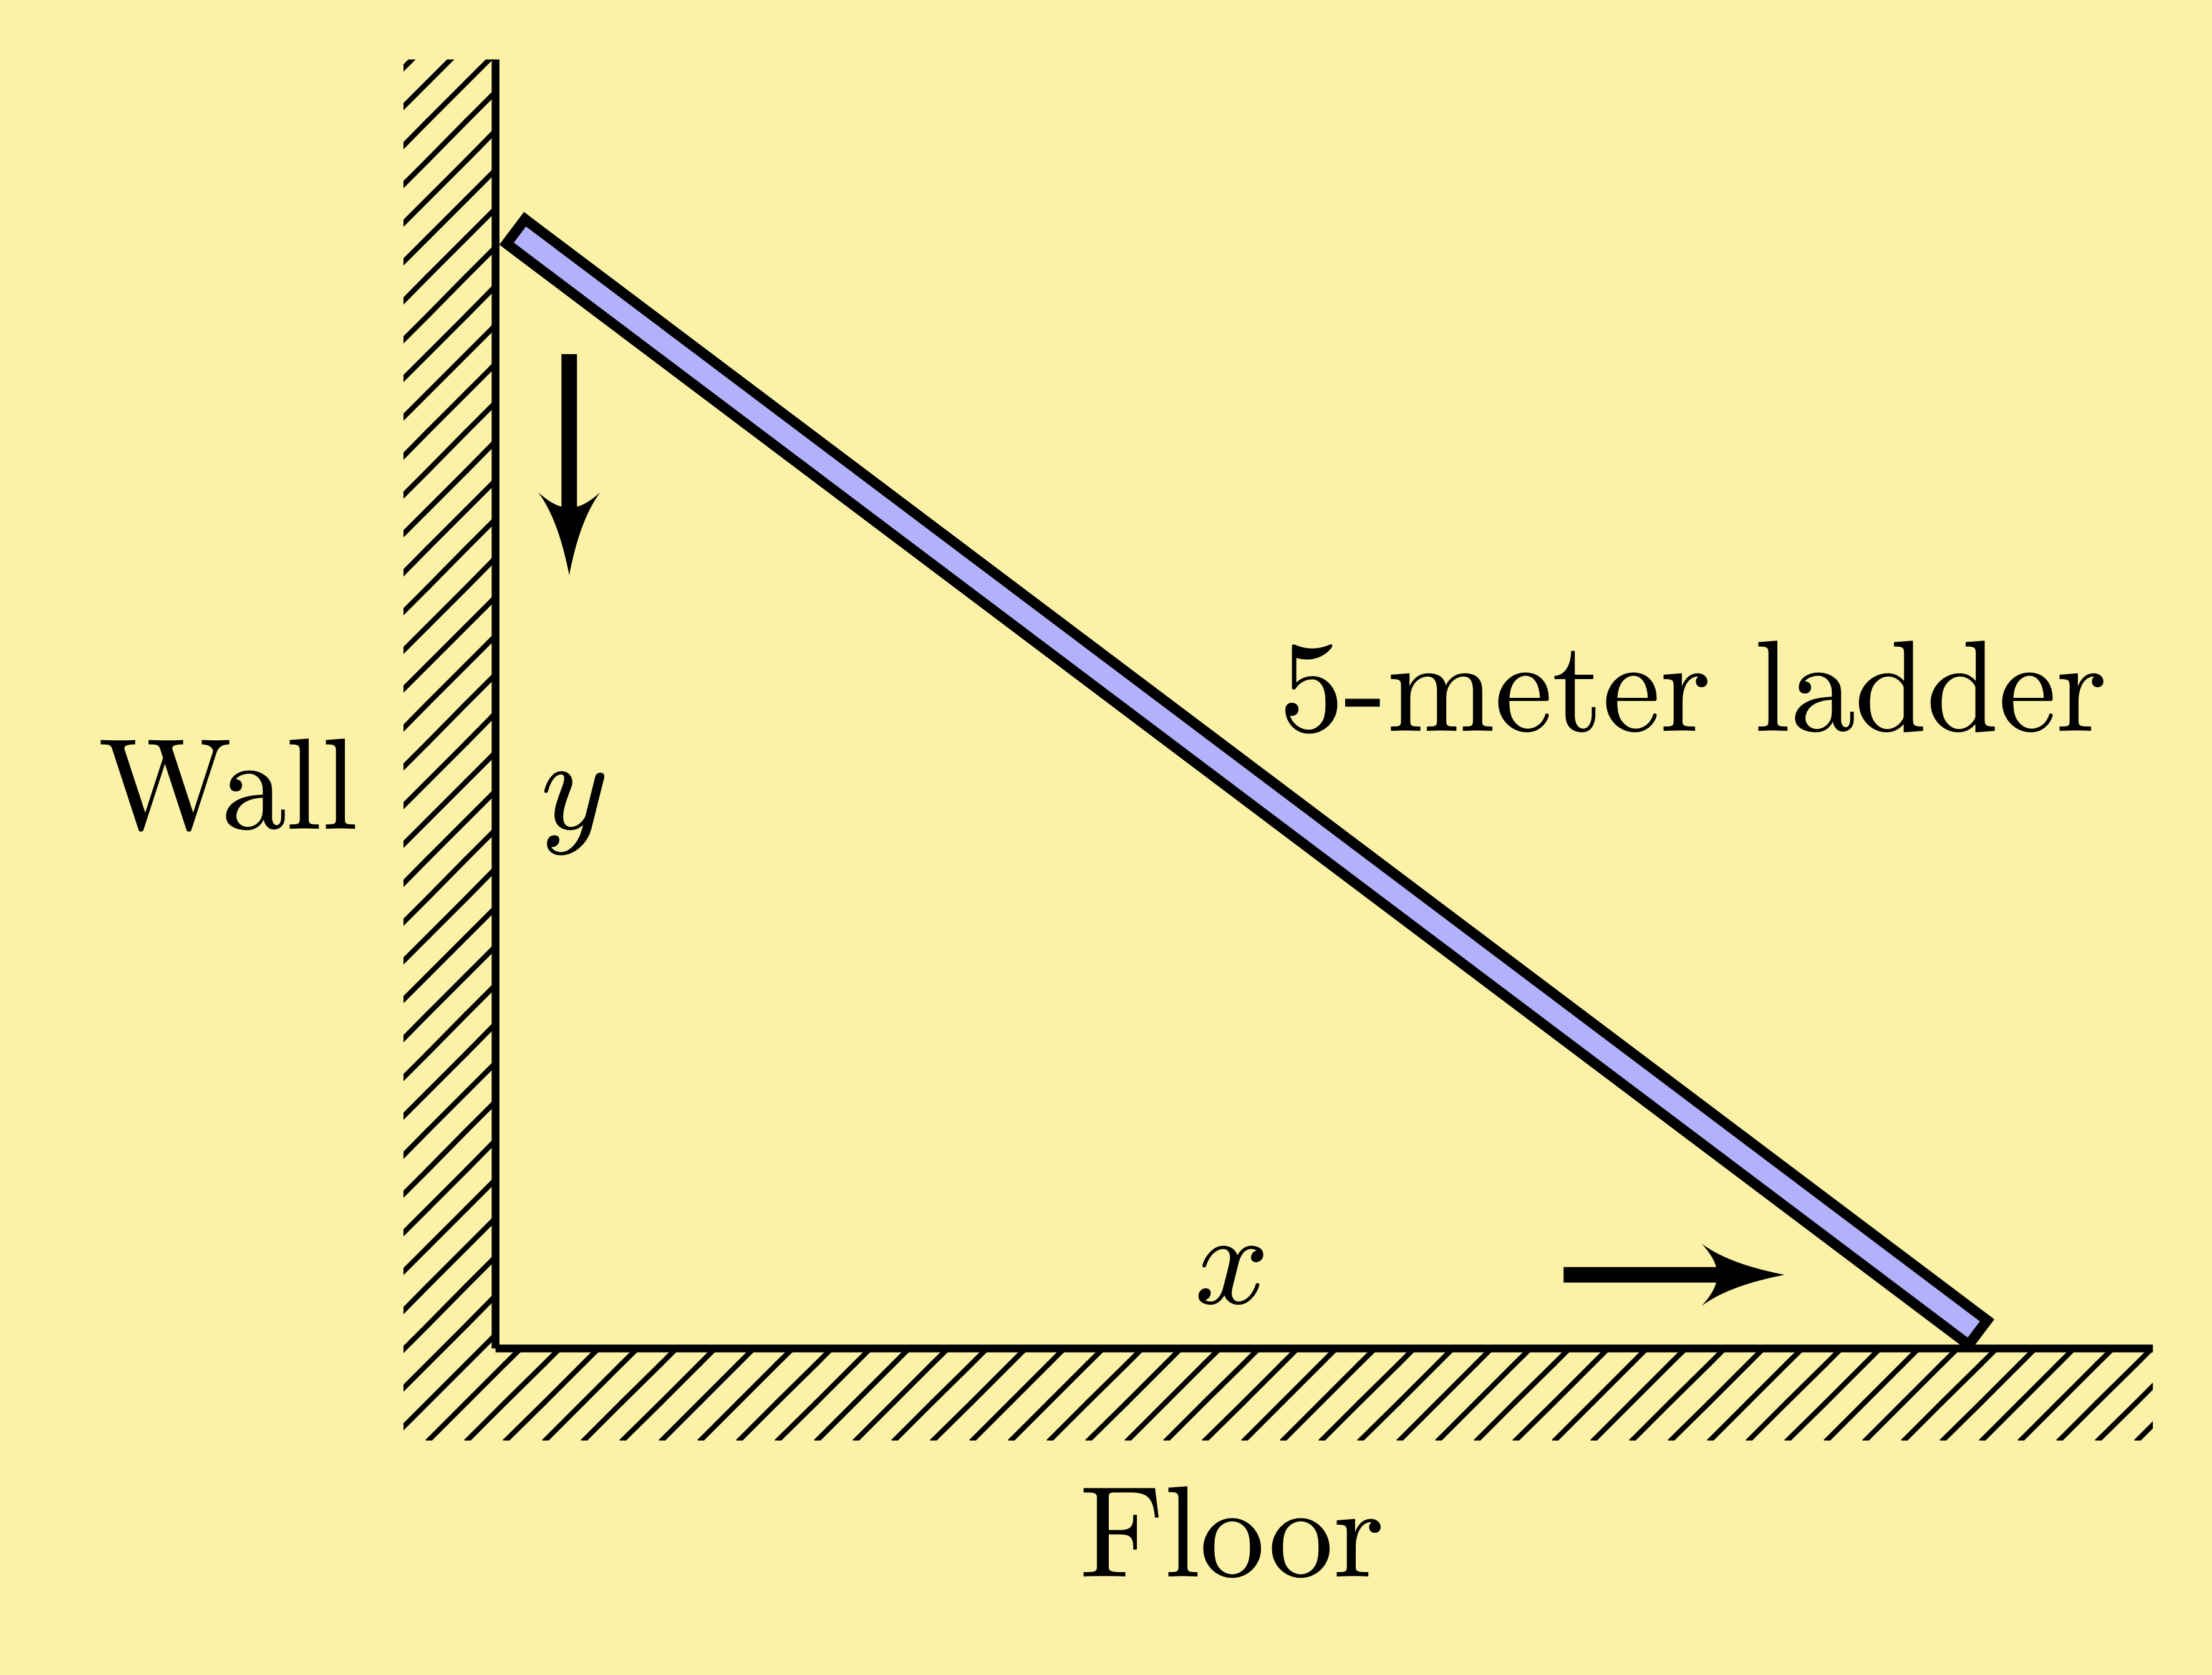 calculus related rates ladder slides or slips down wall